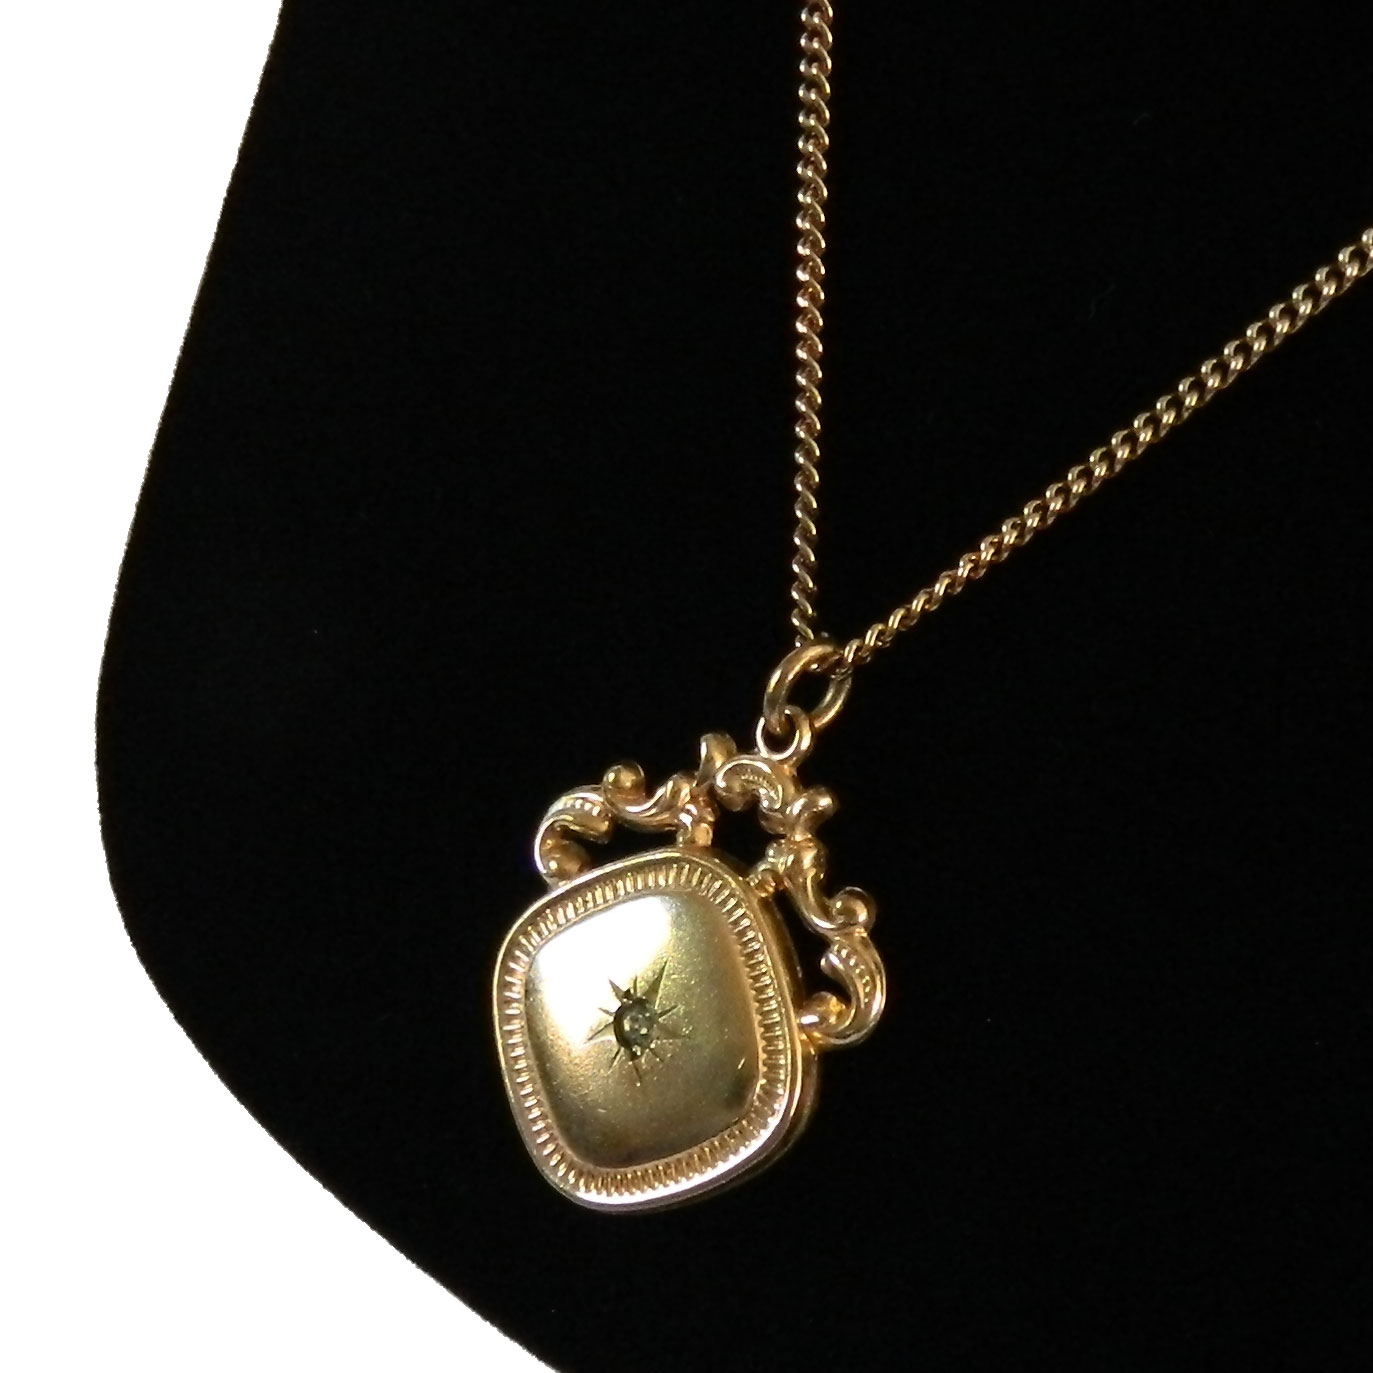 Antique spinning watch fob locket necklace